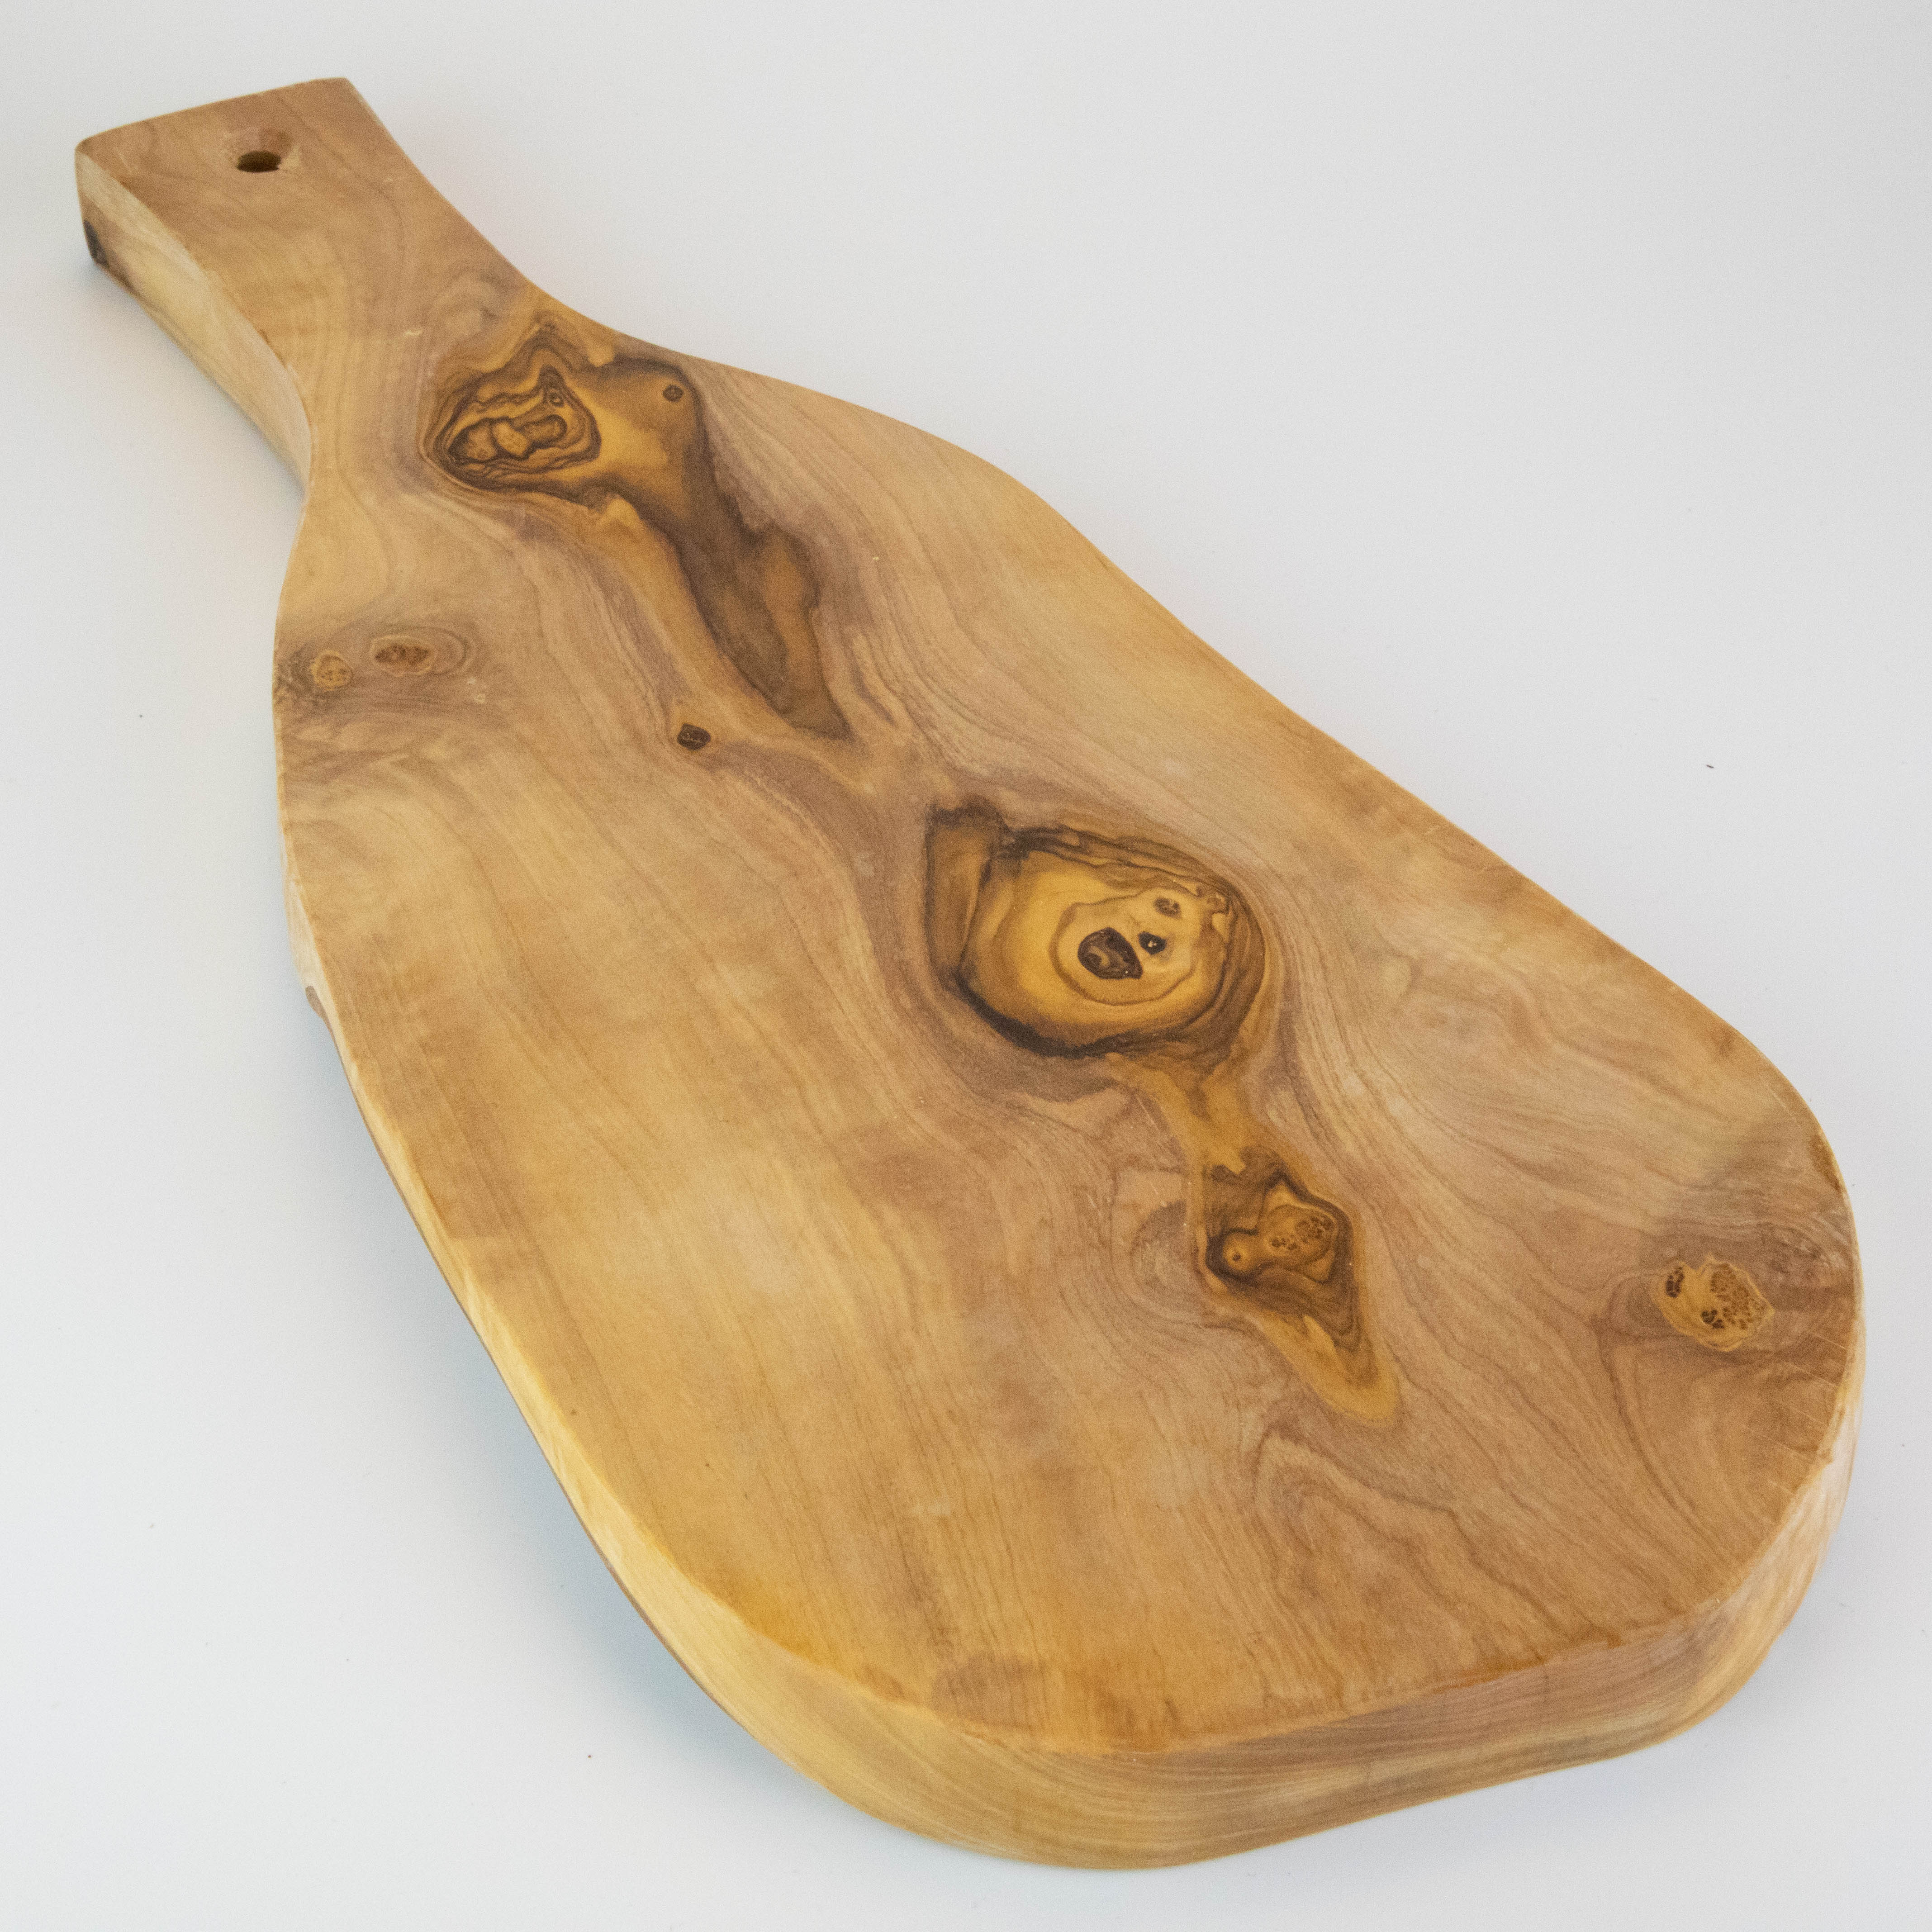 Rustic serving board with handle made of olive wood.